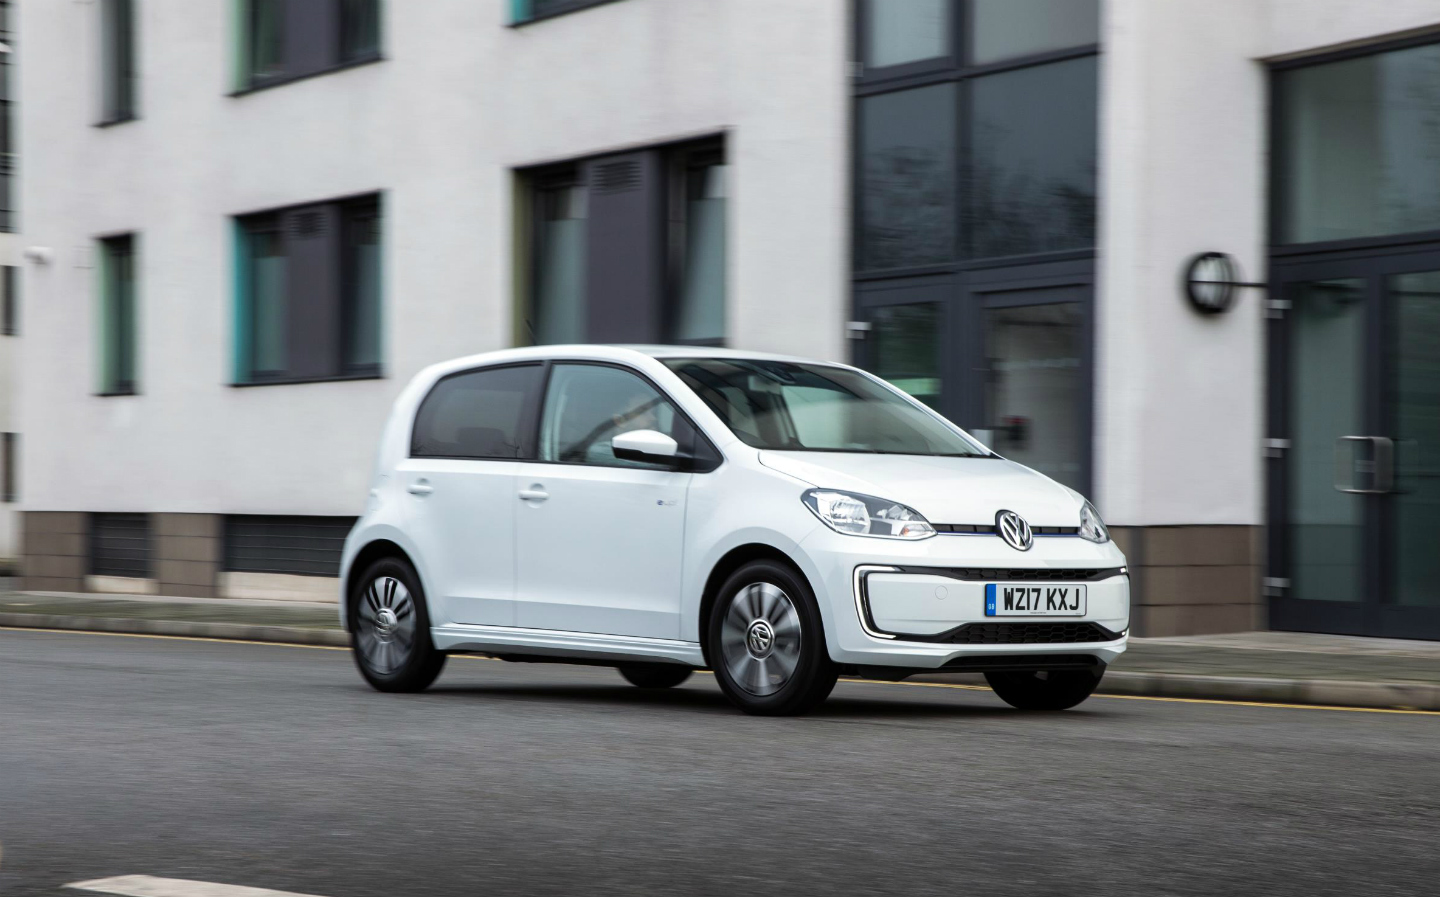 VW e-up! is one of the the best cars to avoid paying road tax (VED)